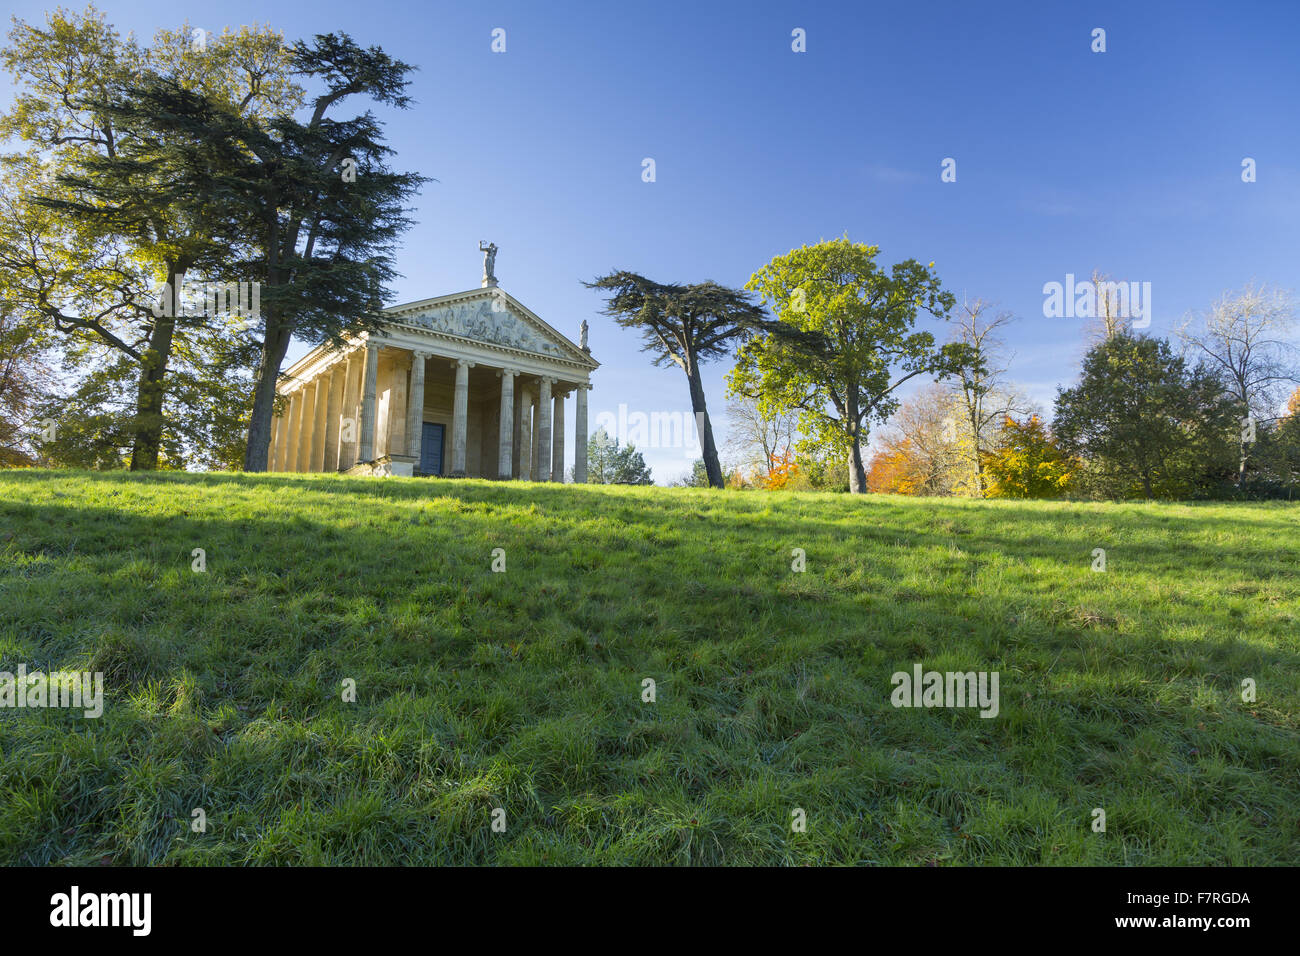 The Temple of Concord and Victory at Stowe, Buckinghamshire. Stowe is a landscaped garden with picture-perfect views, winding paths, lakeside walks and classical temples. Stock Photo